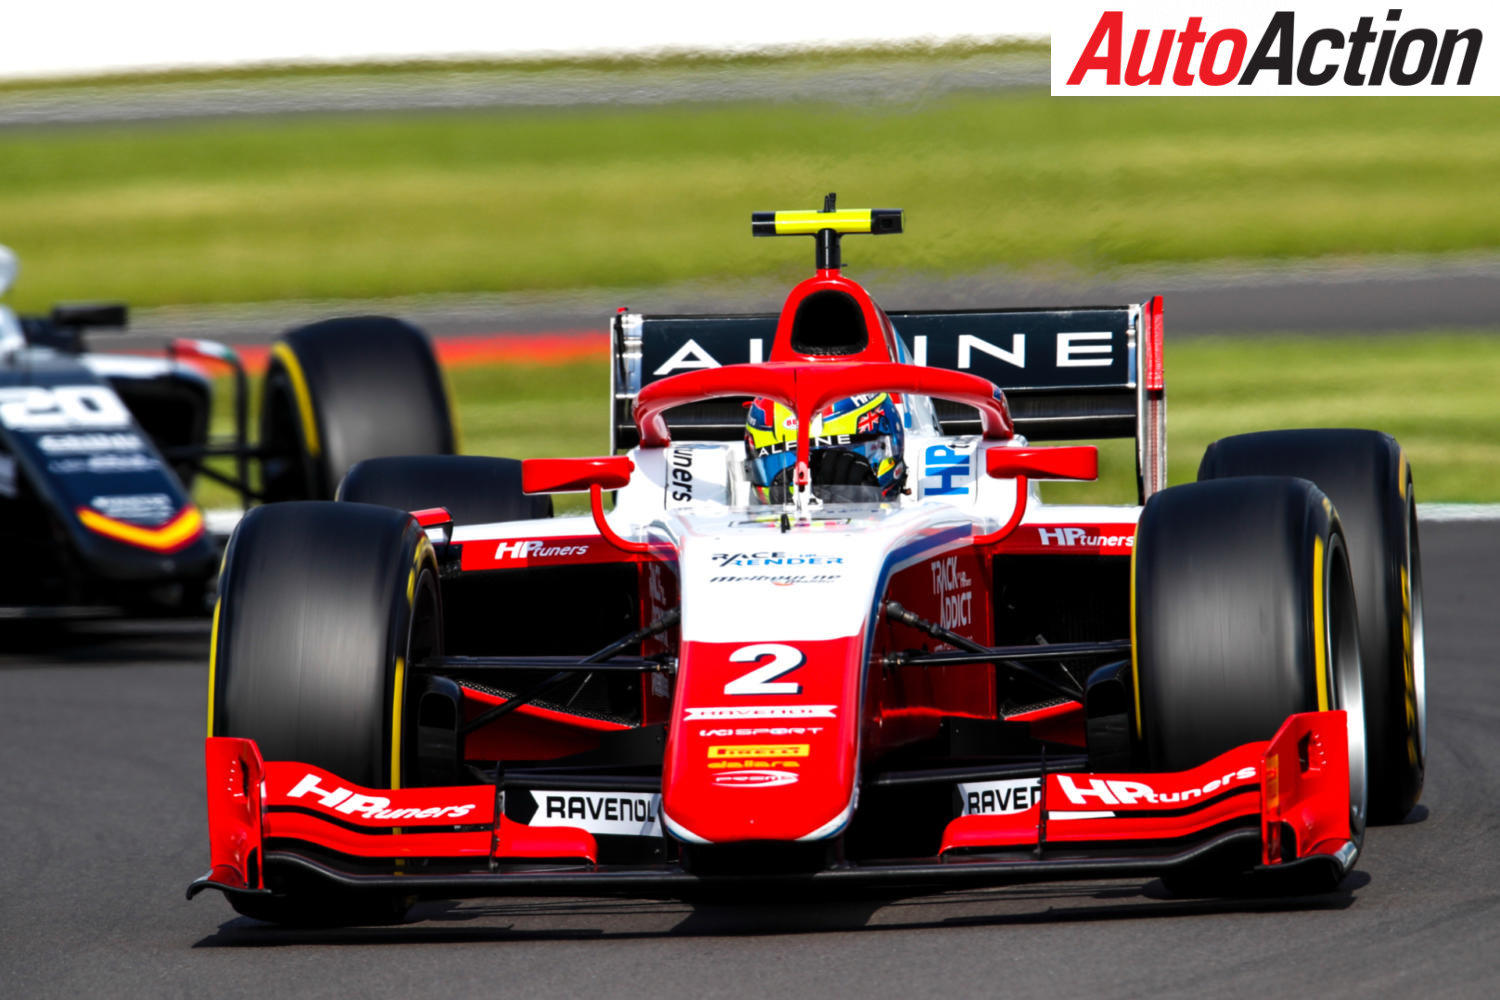 Oscar Piastri takes F2 pole in Silverstone - Image: Motorsport Images